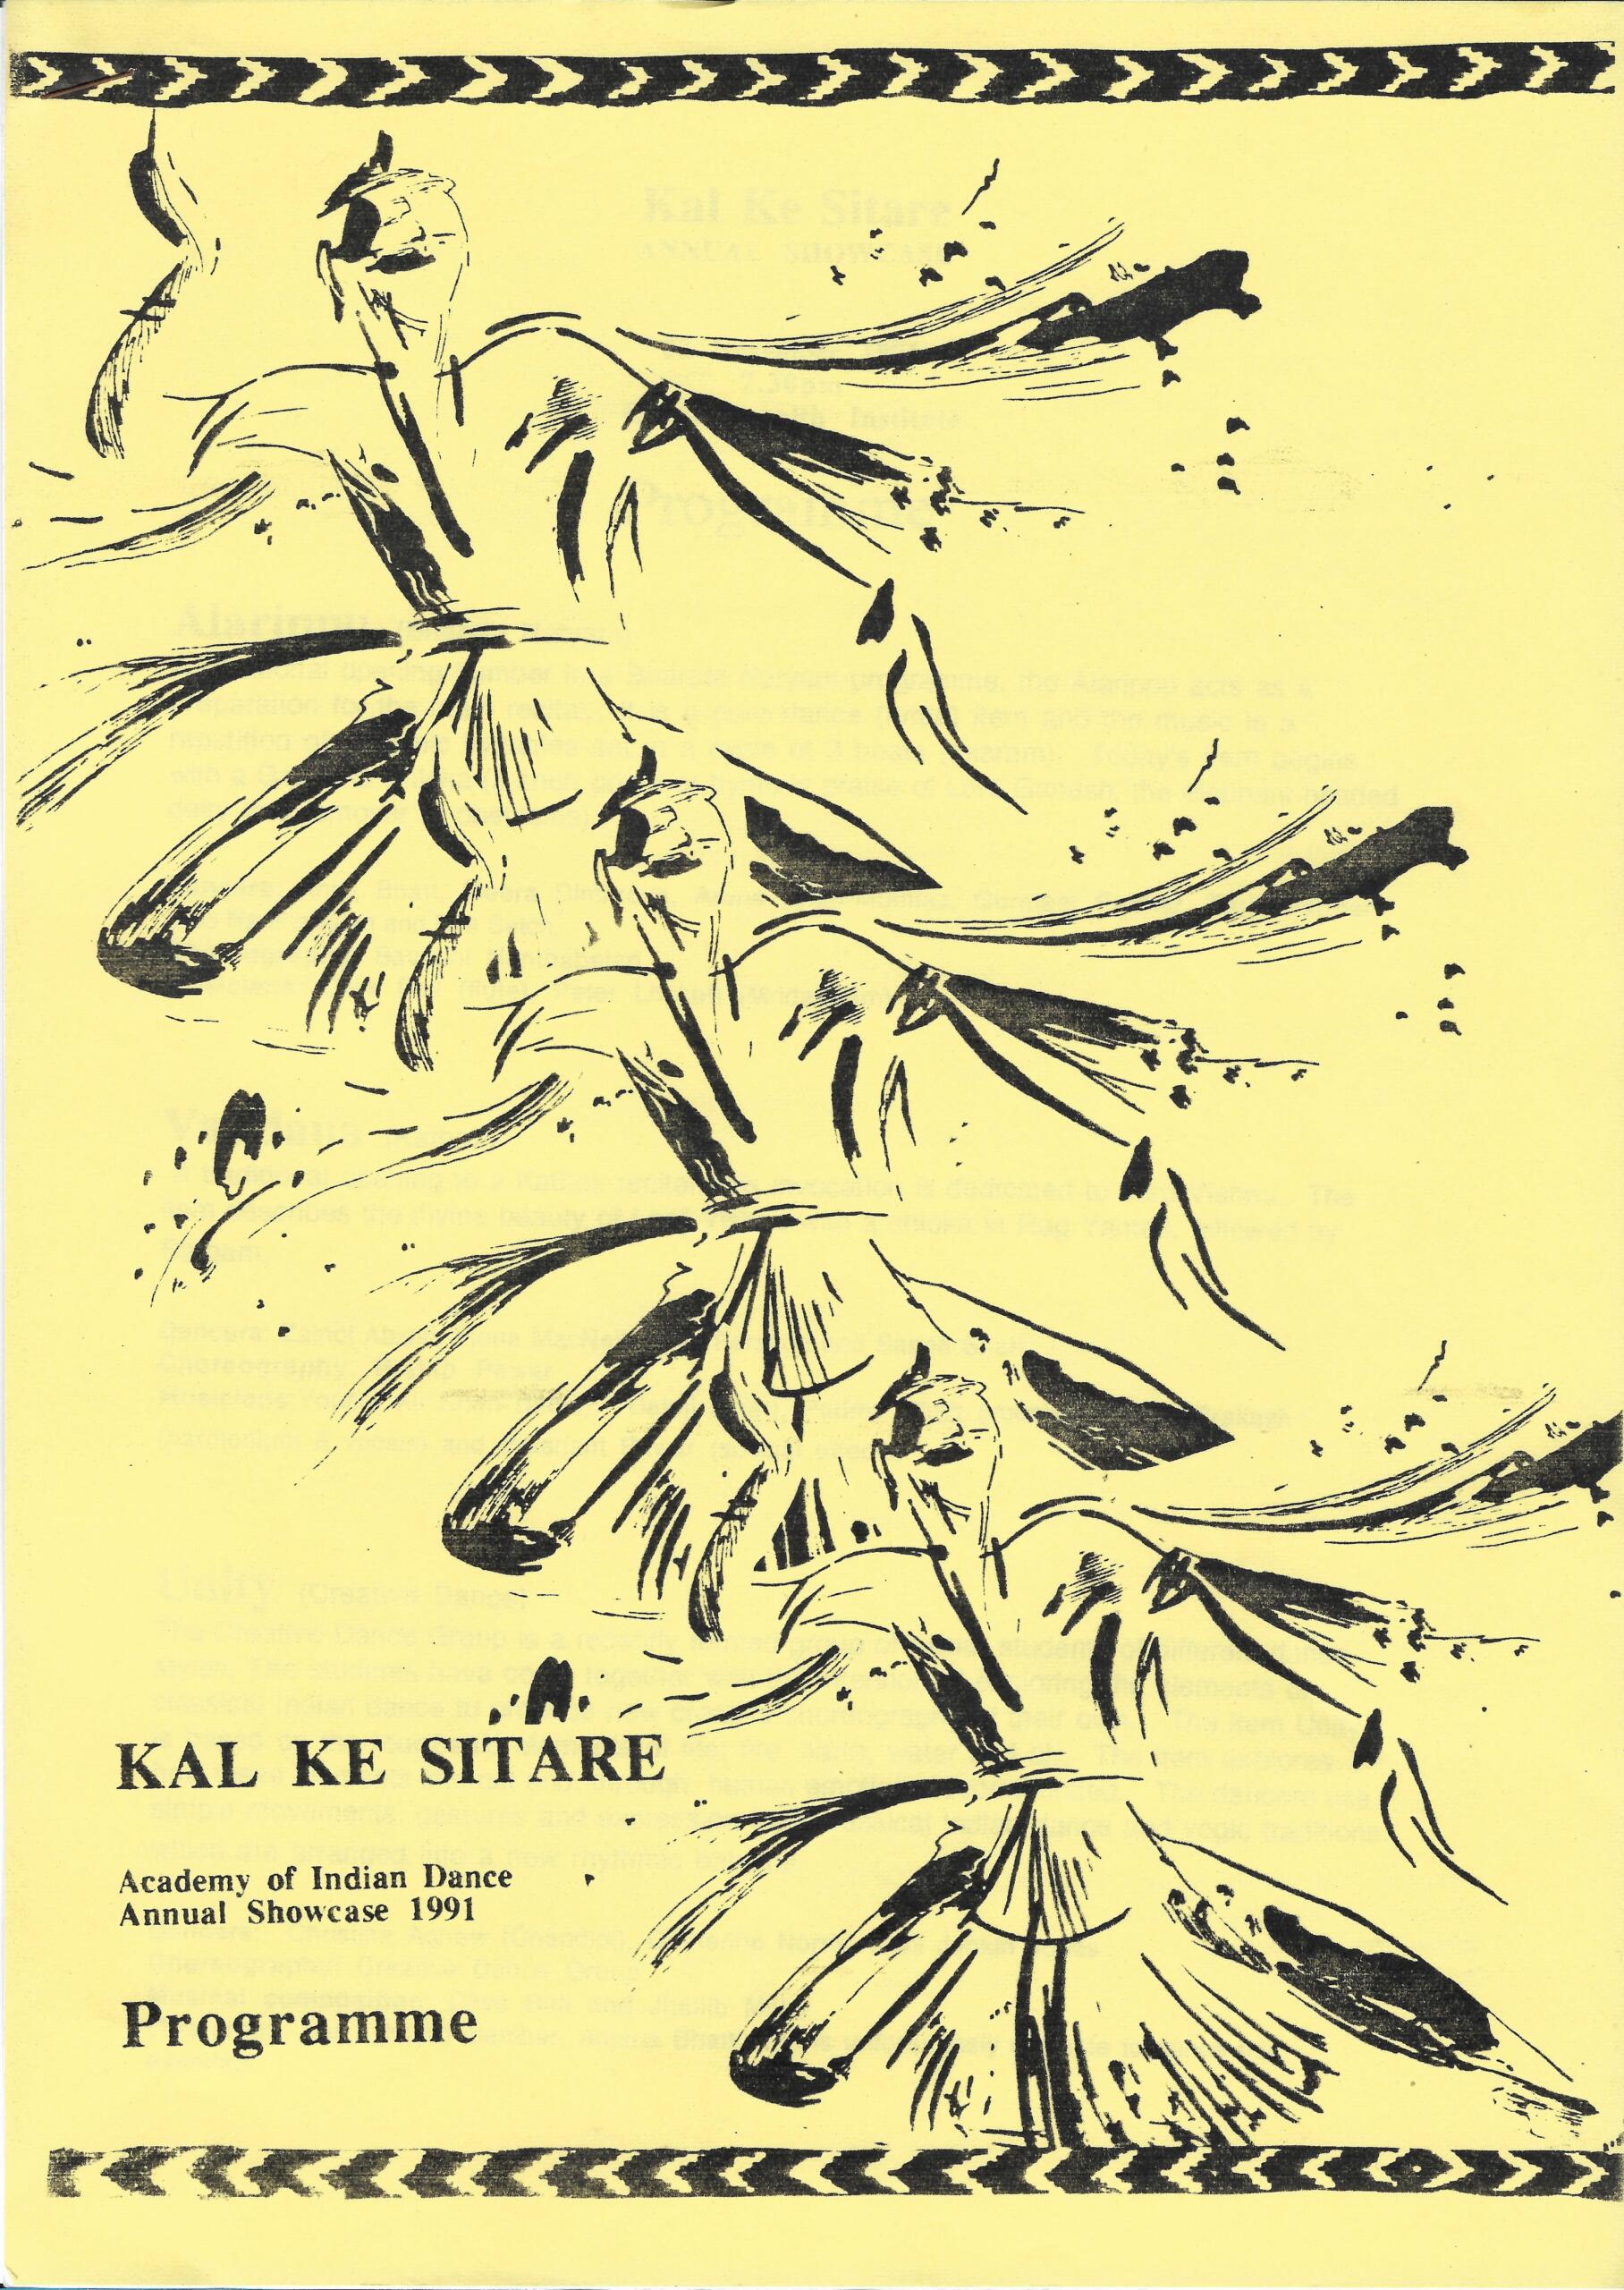 dance event programme cover